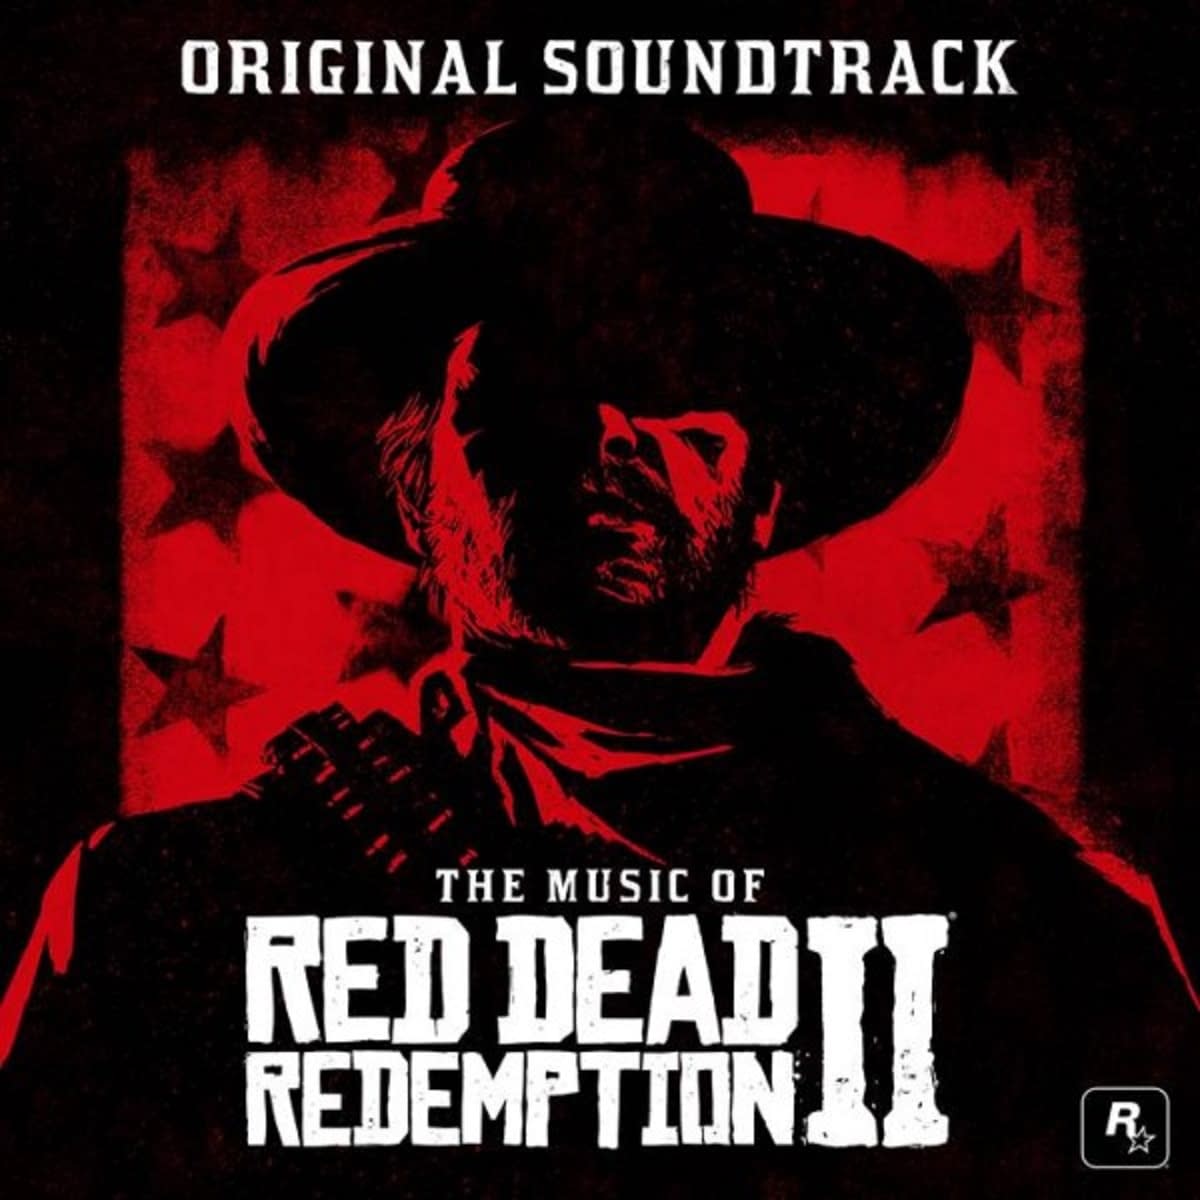 "Red Dead Redemption II" Original Soundtrack Now Available